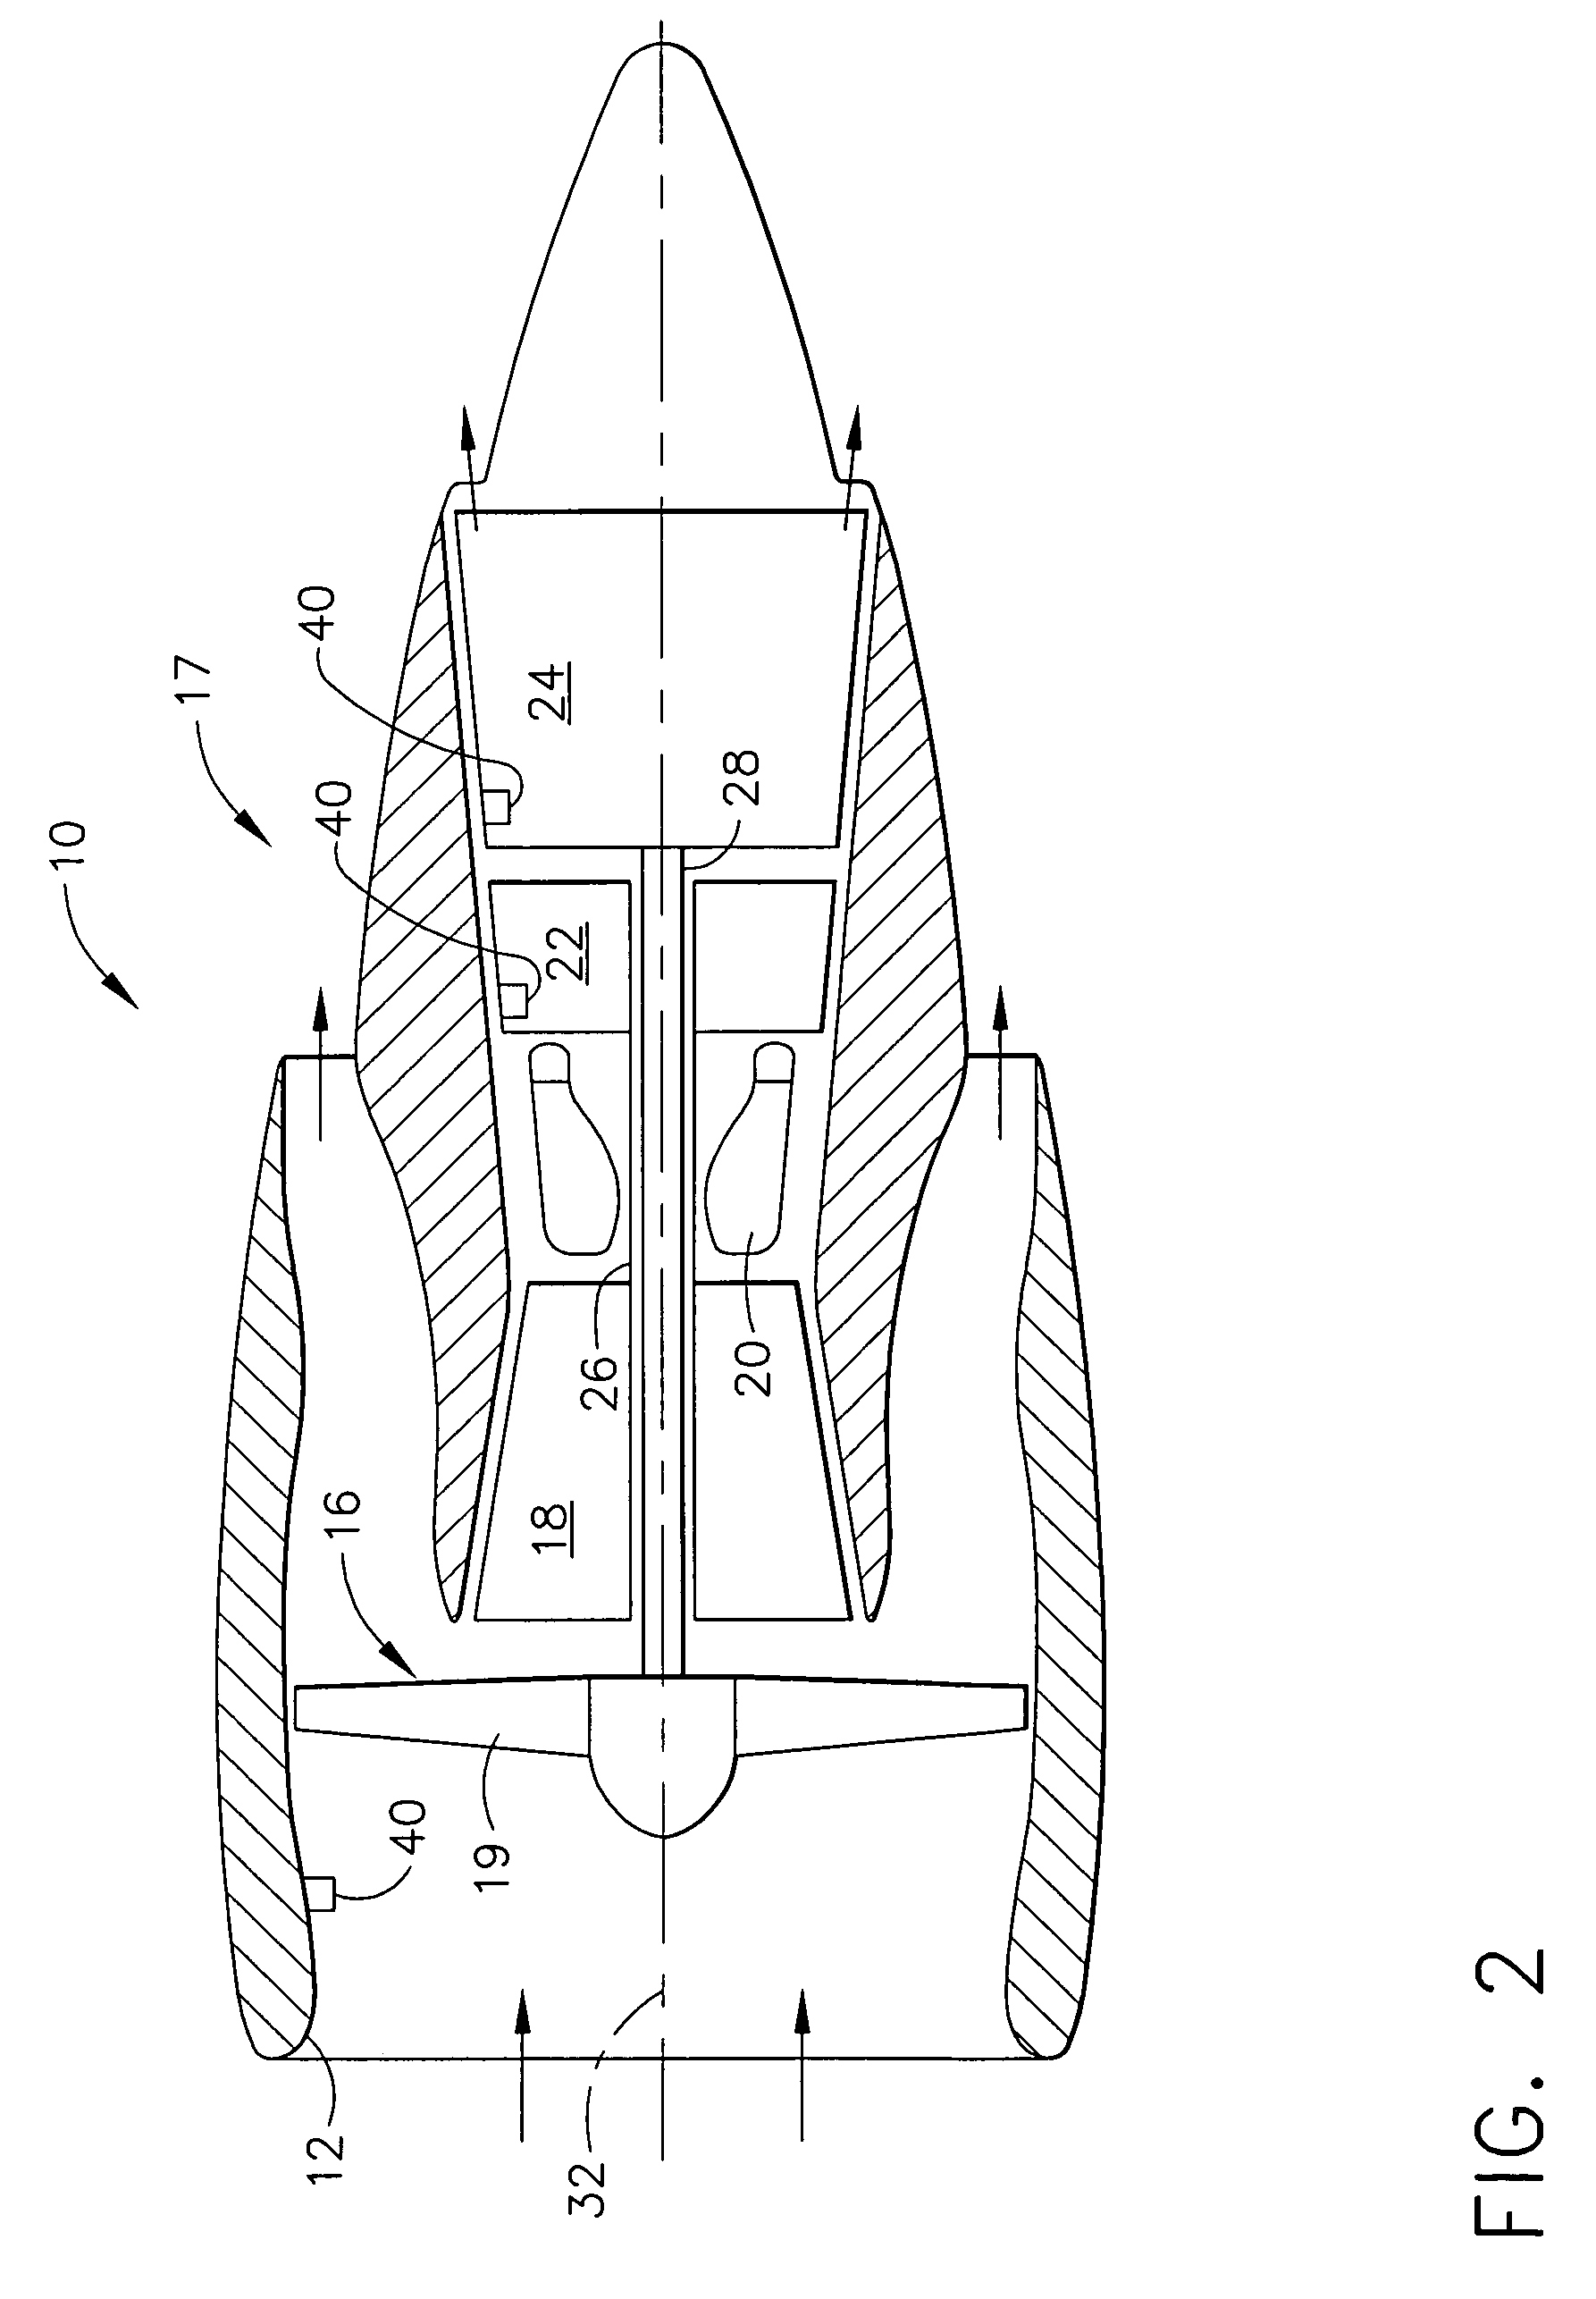 Method and apparatus for determining engine part life usage